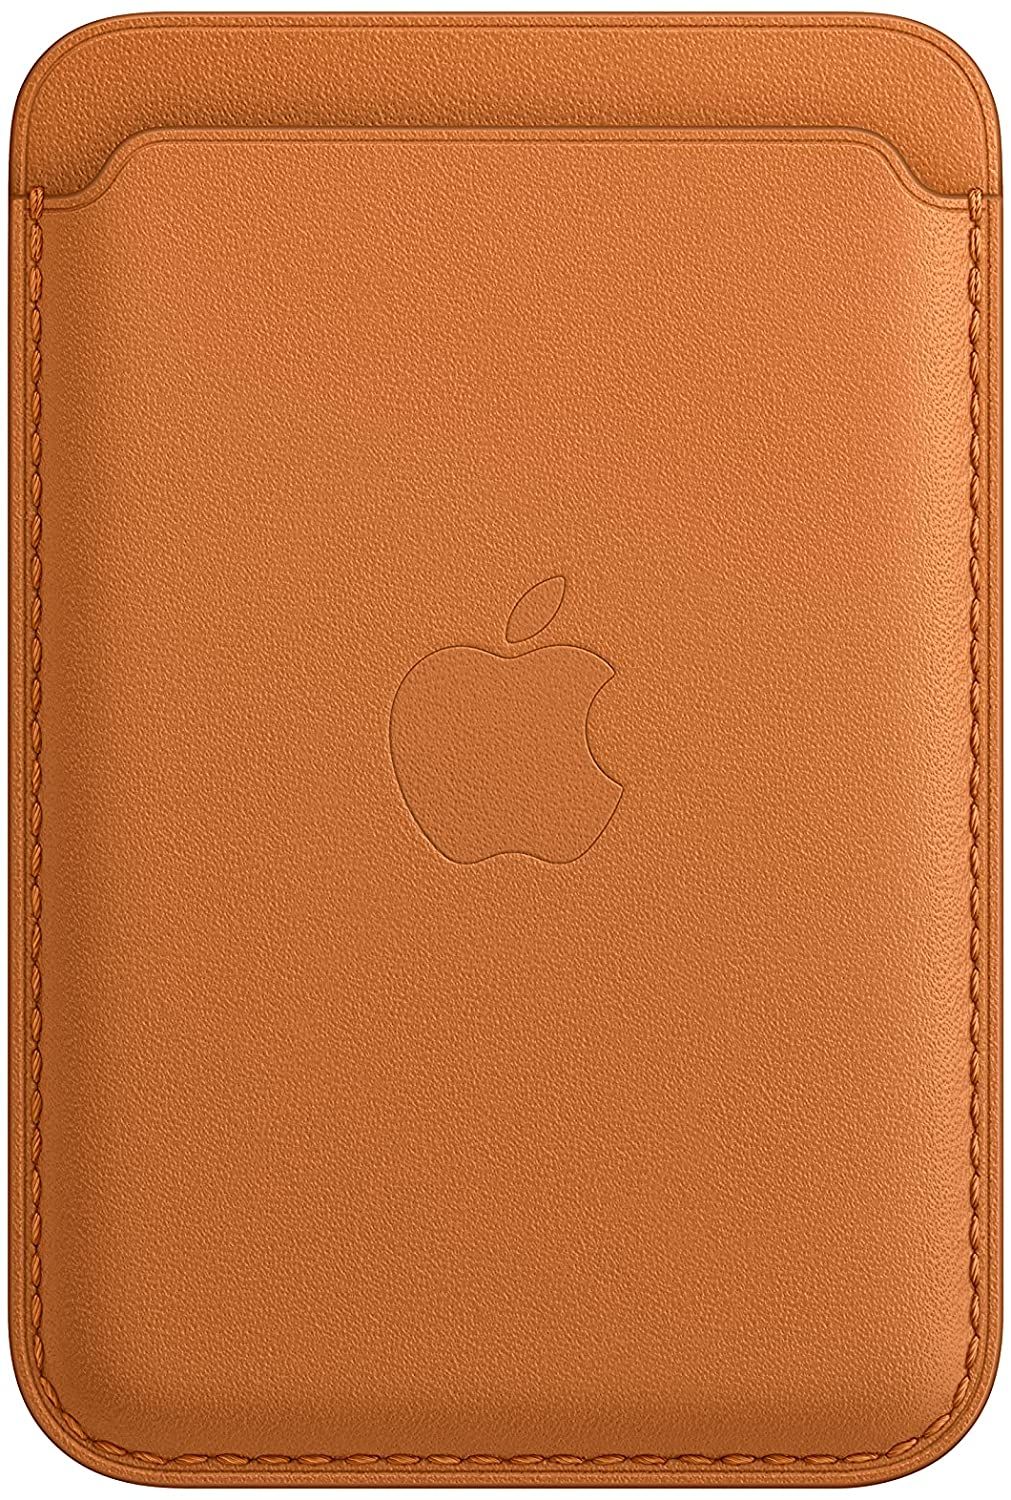 Apple Leather Wallet With MagSafe 3